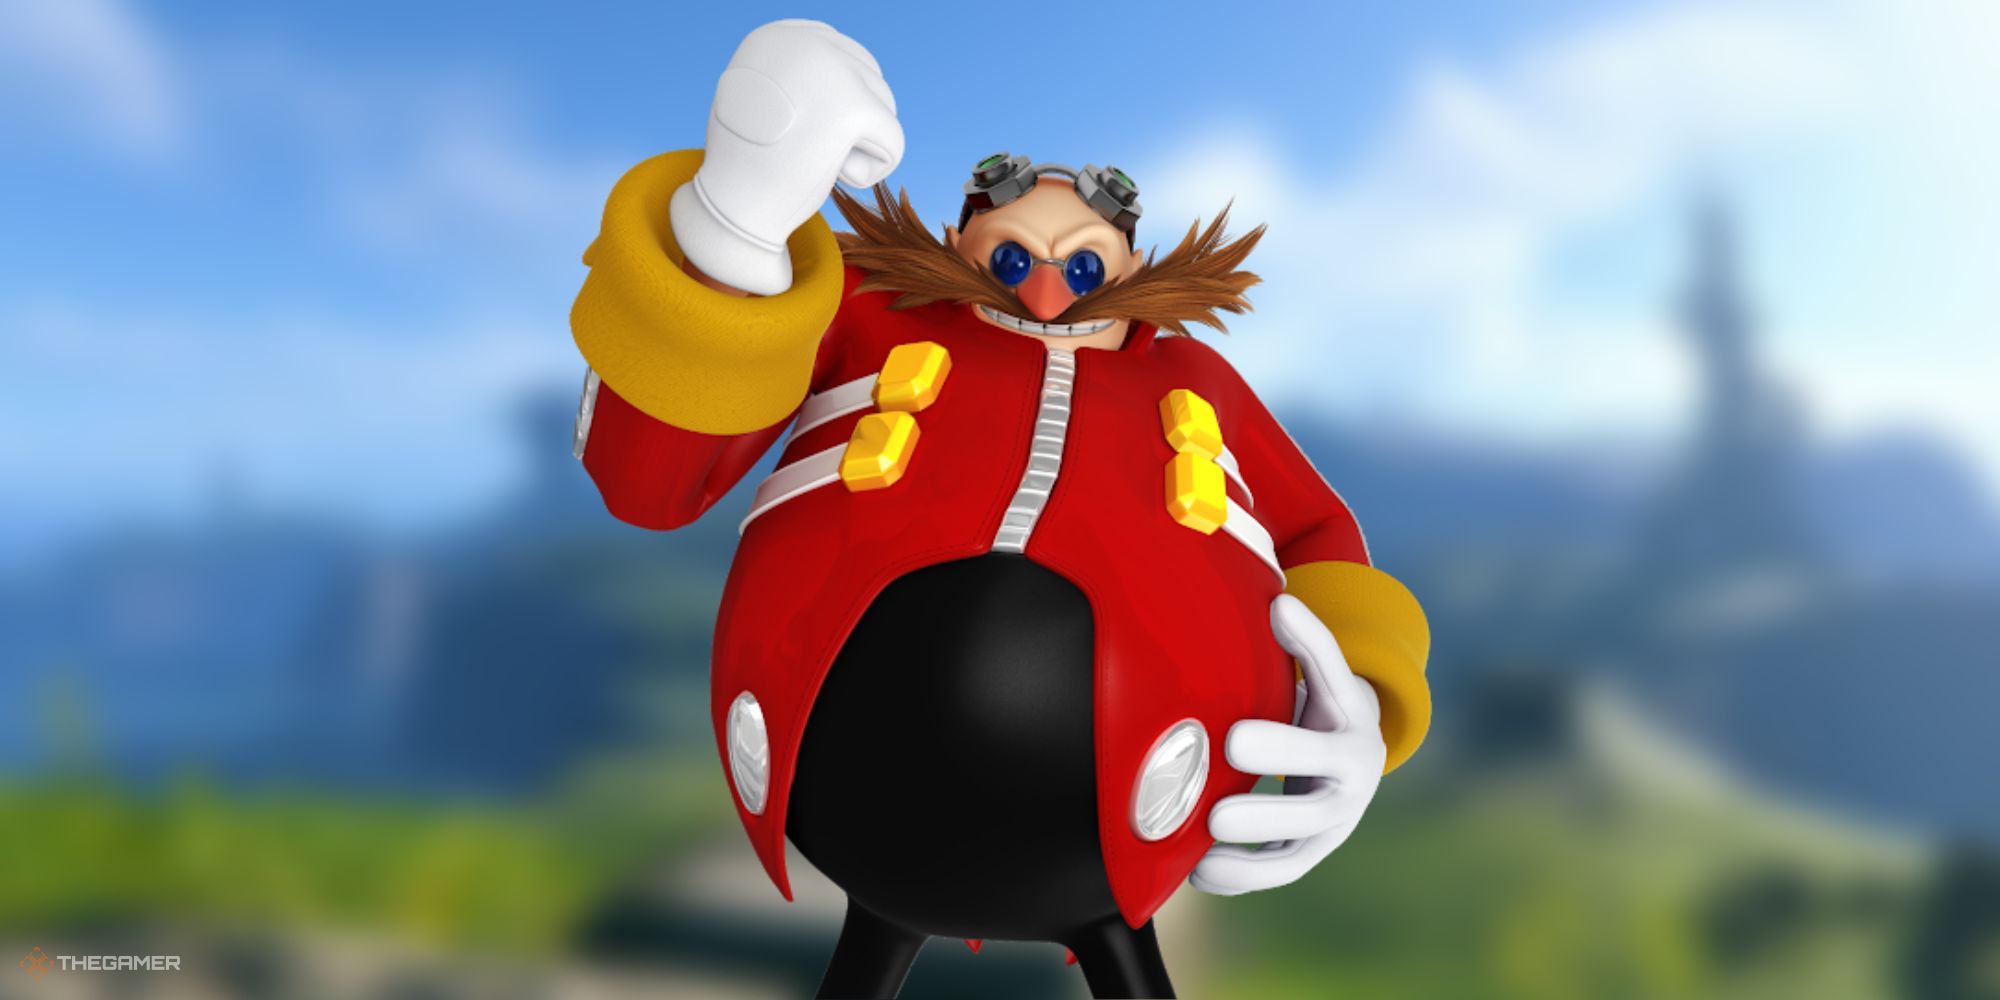 Eggman stands in front of a blurred Sonic Frontiers landscape